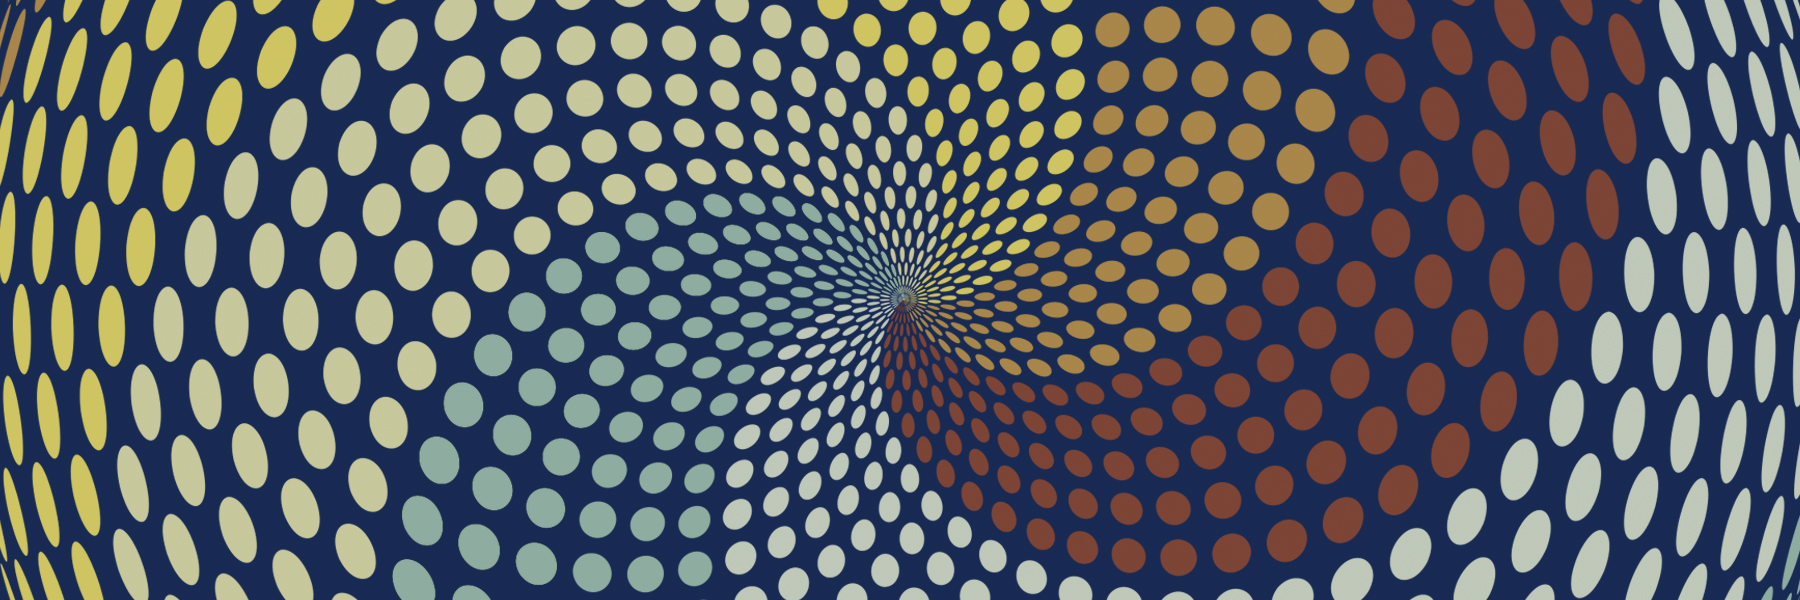  graphic of swirling dots